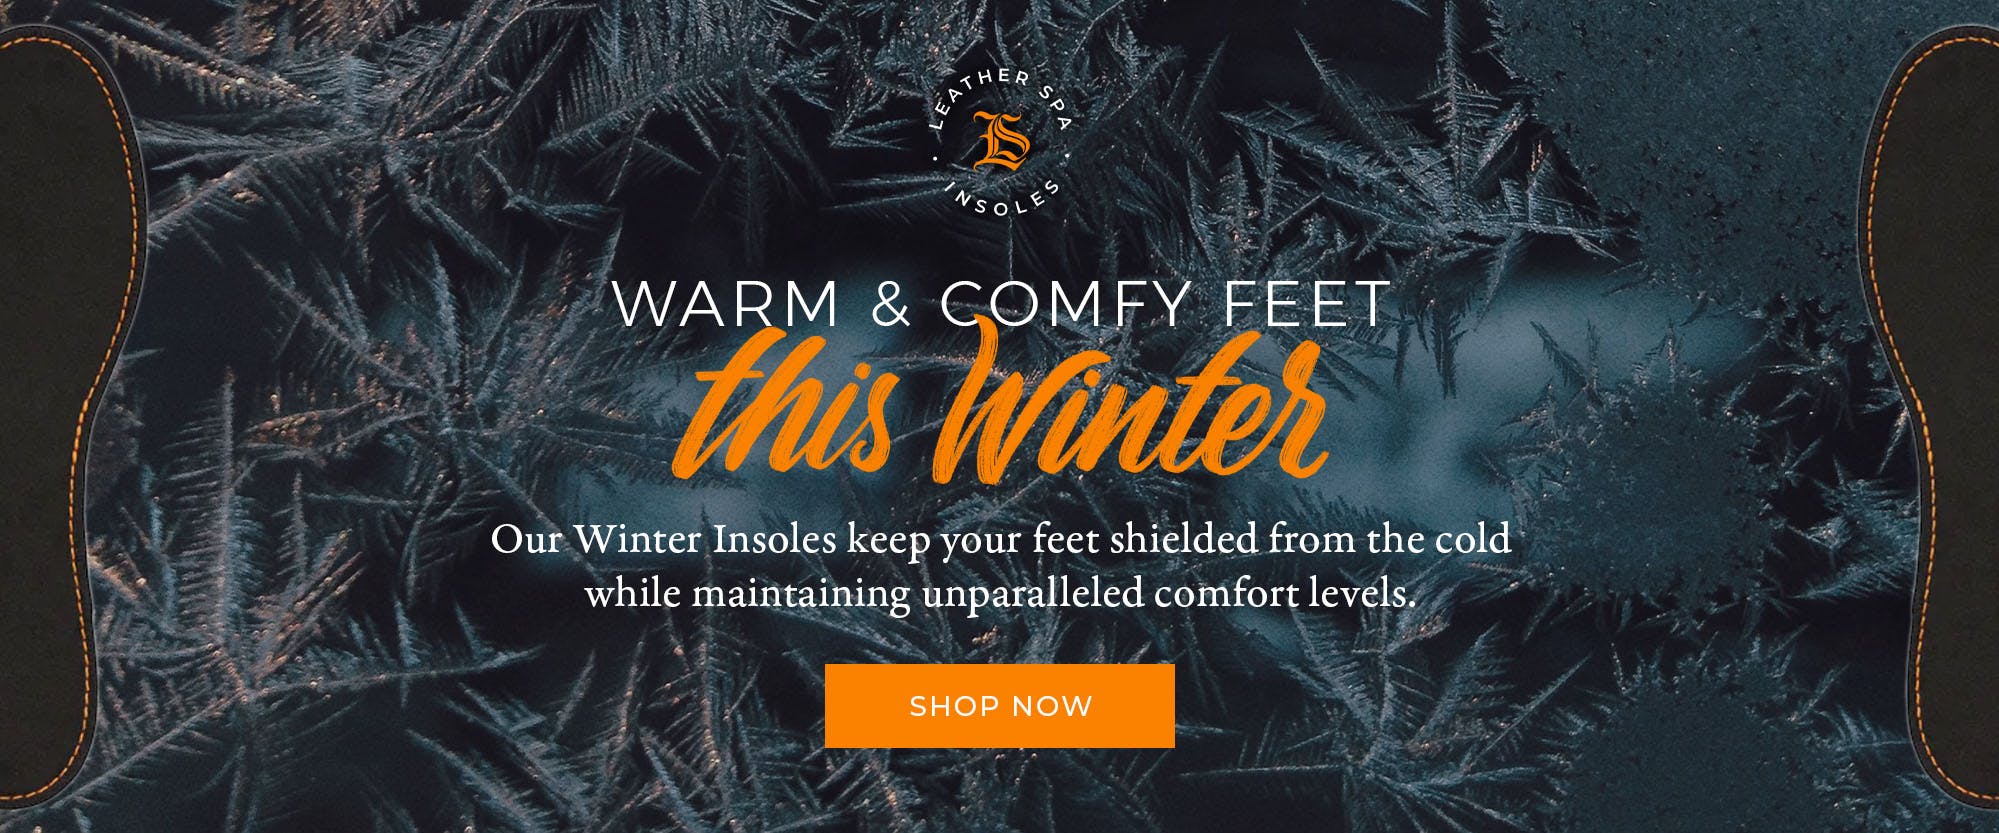 Our Winter Insoles keep your feet shielded from the cold while maintaining unparalleled comfort levels.